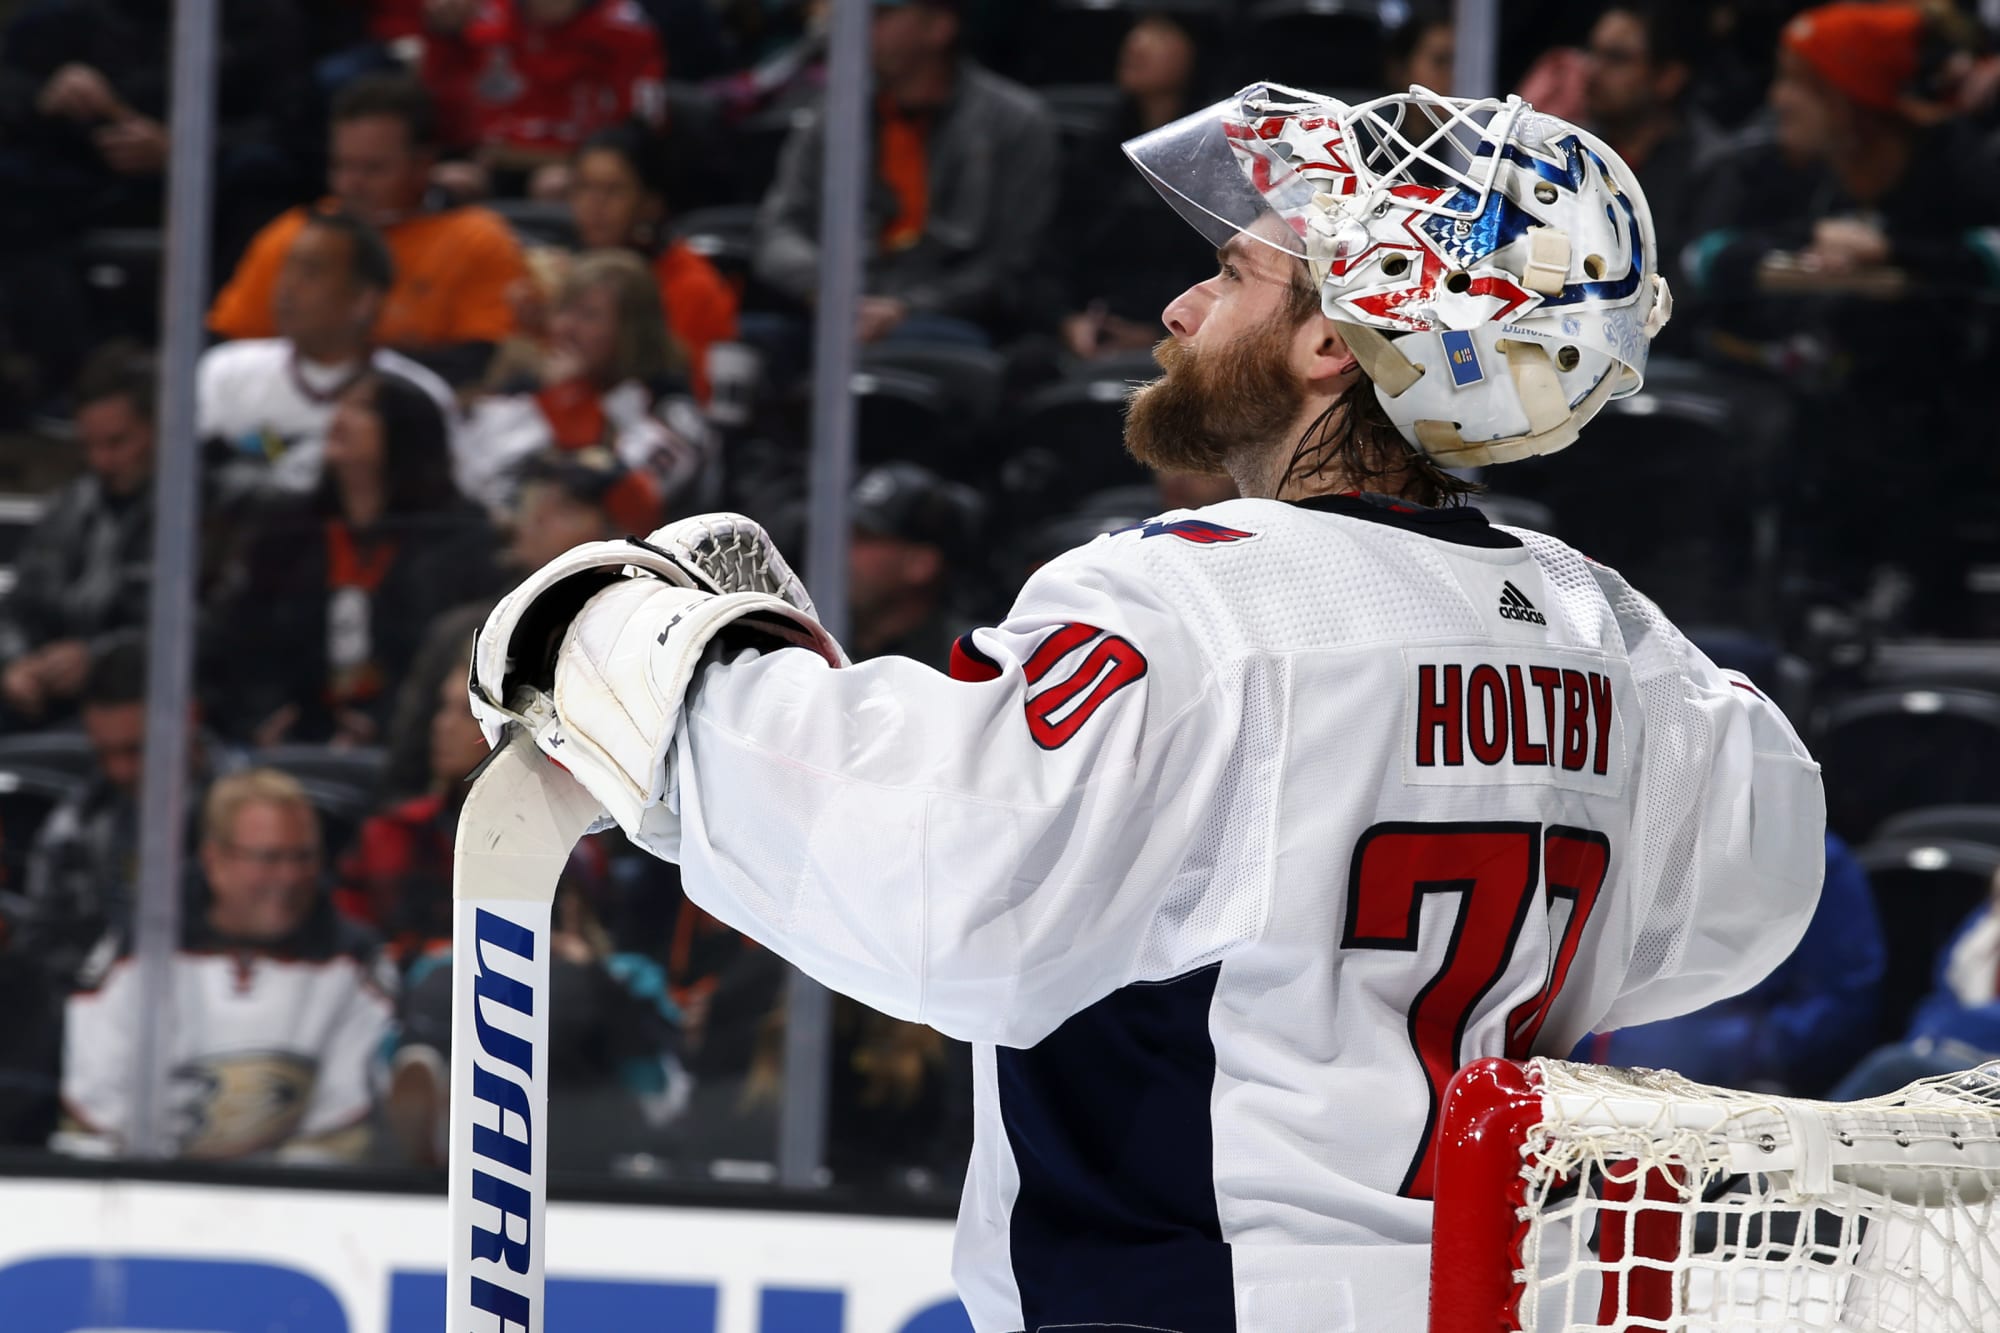 holtby caps jersey